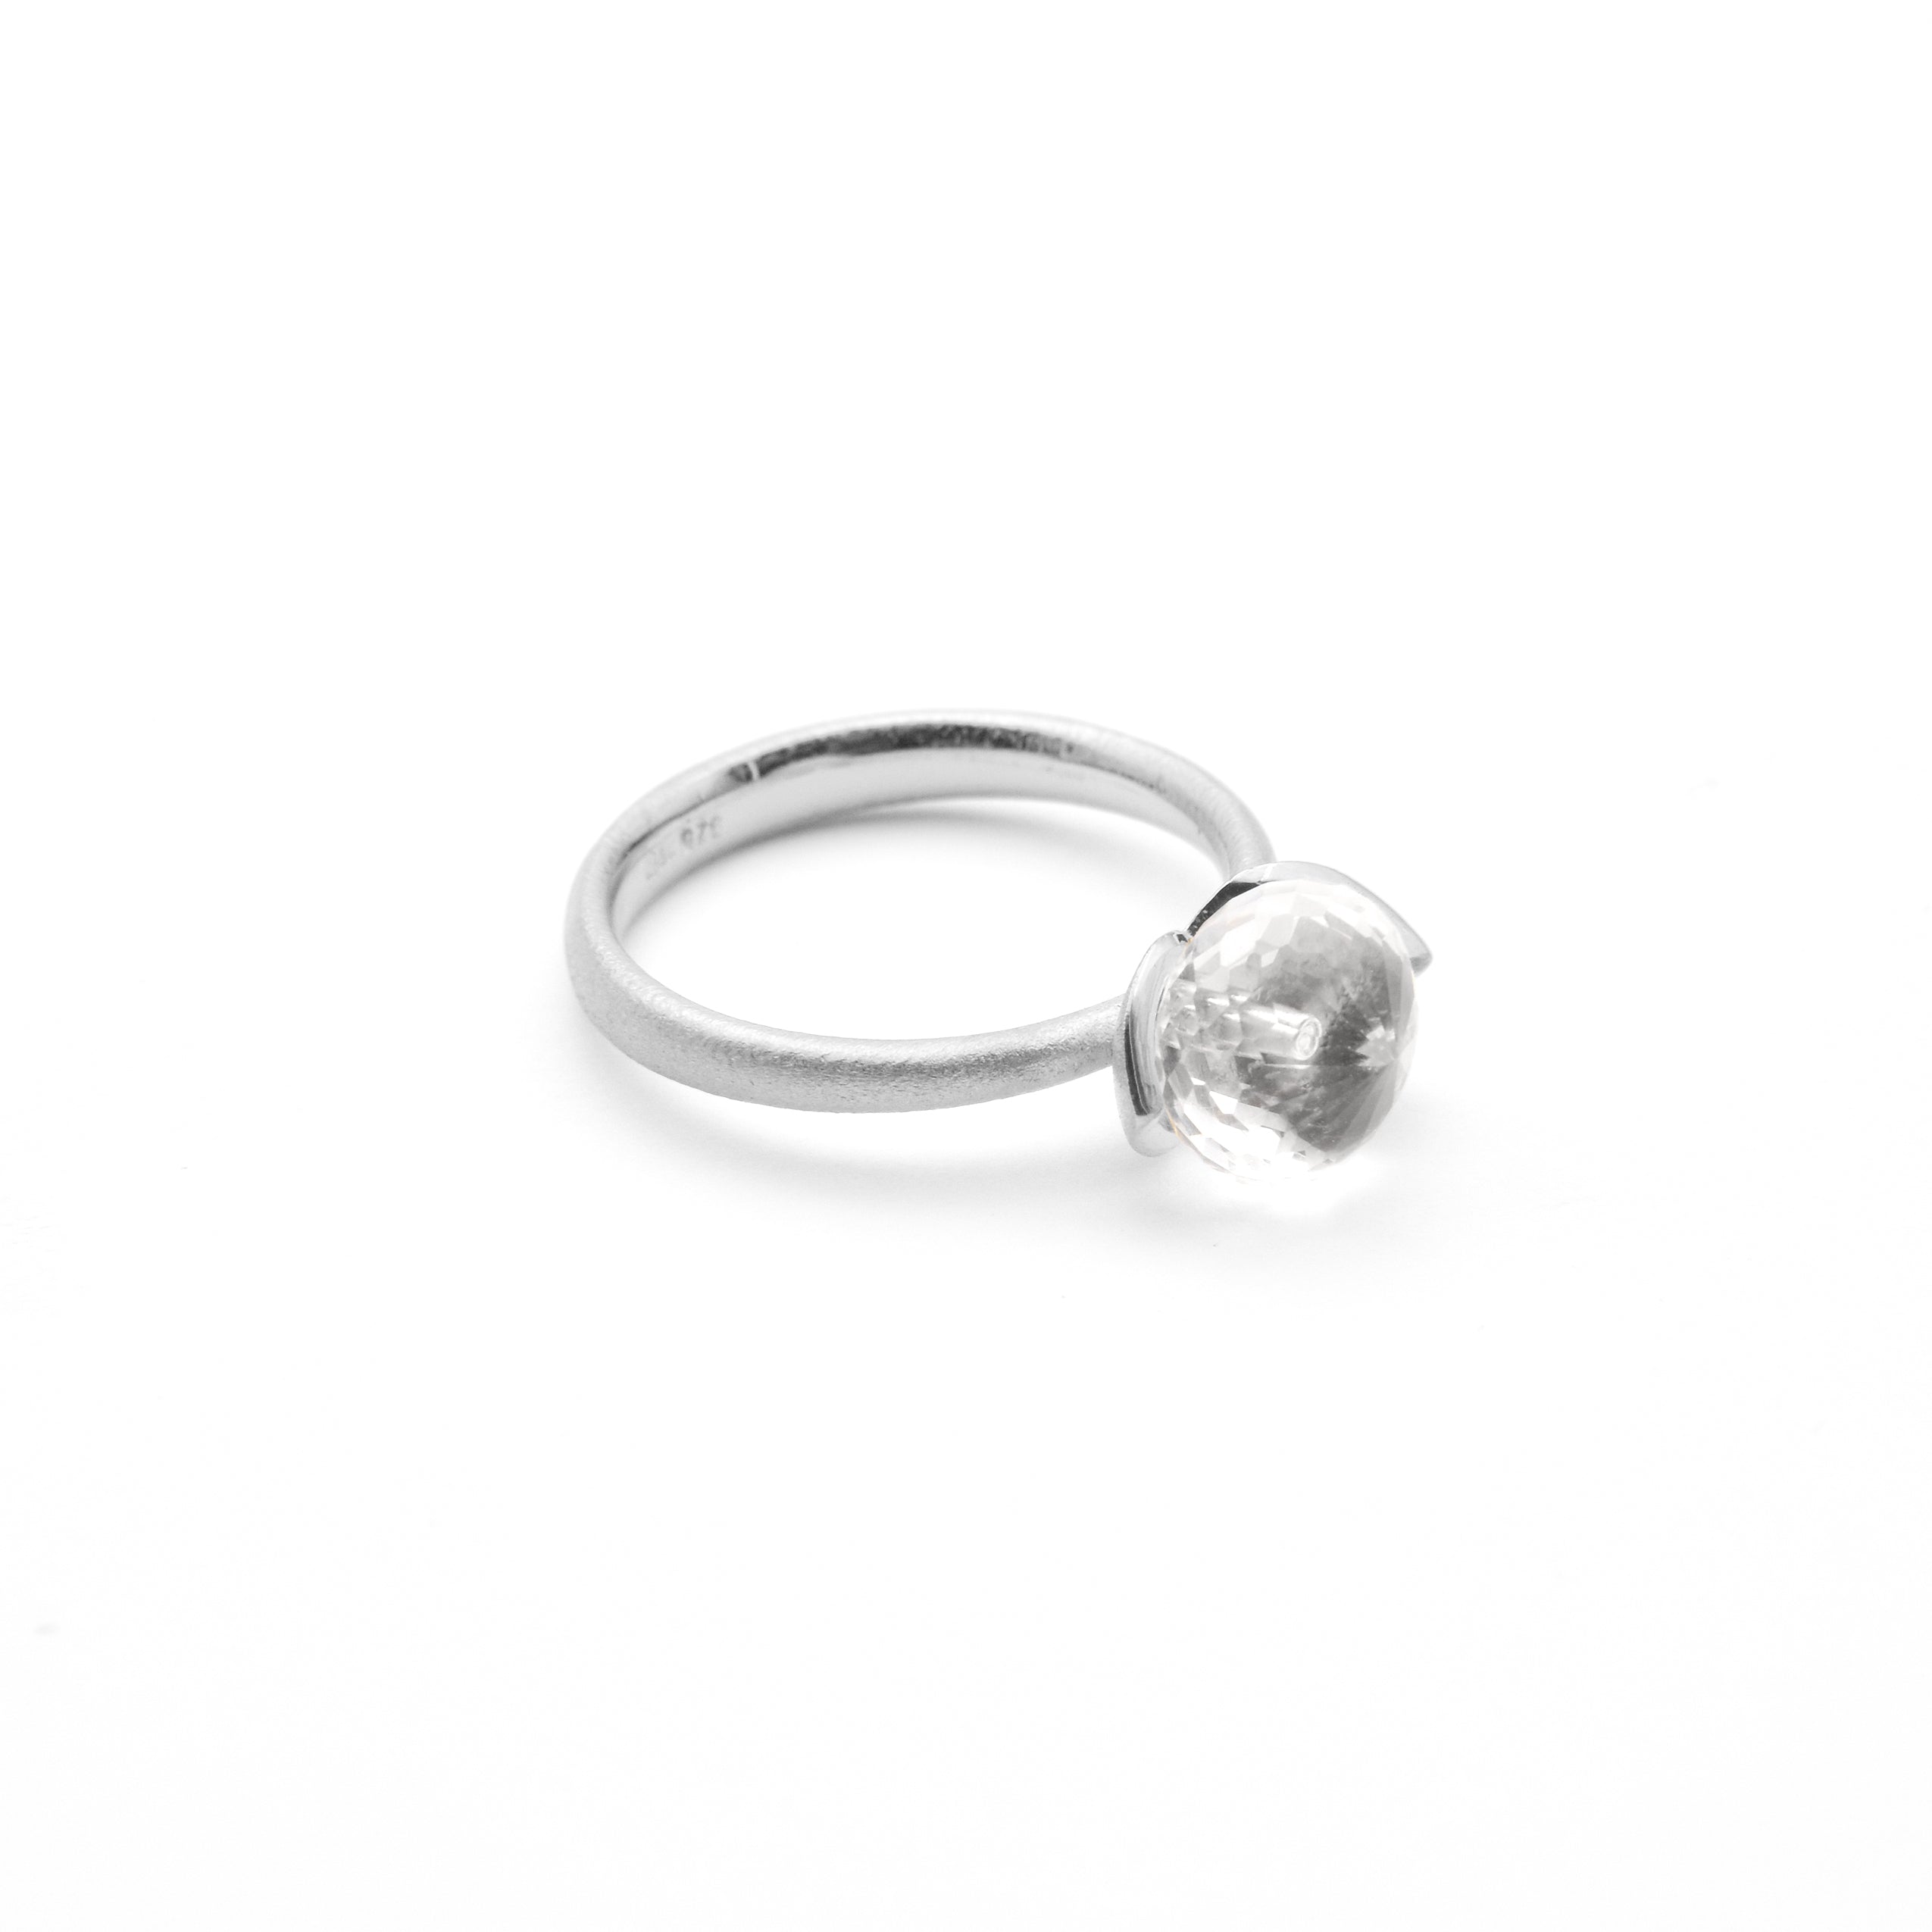 Dolce ring "smal" with rock crystal 925/-